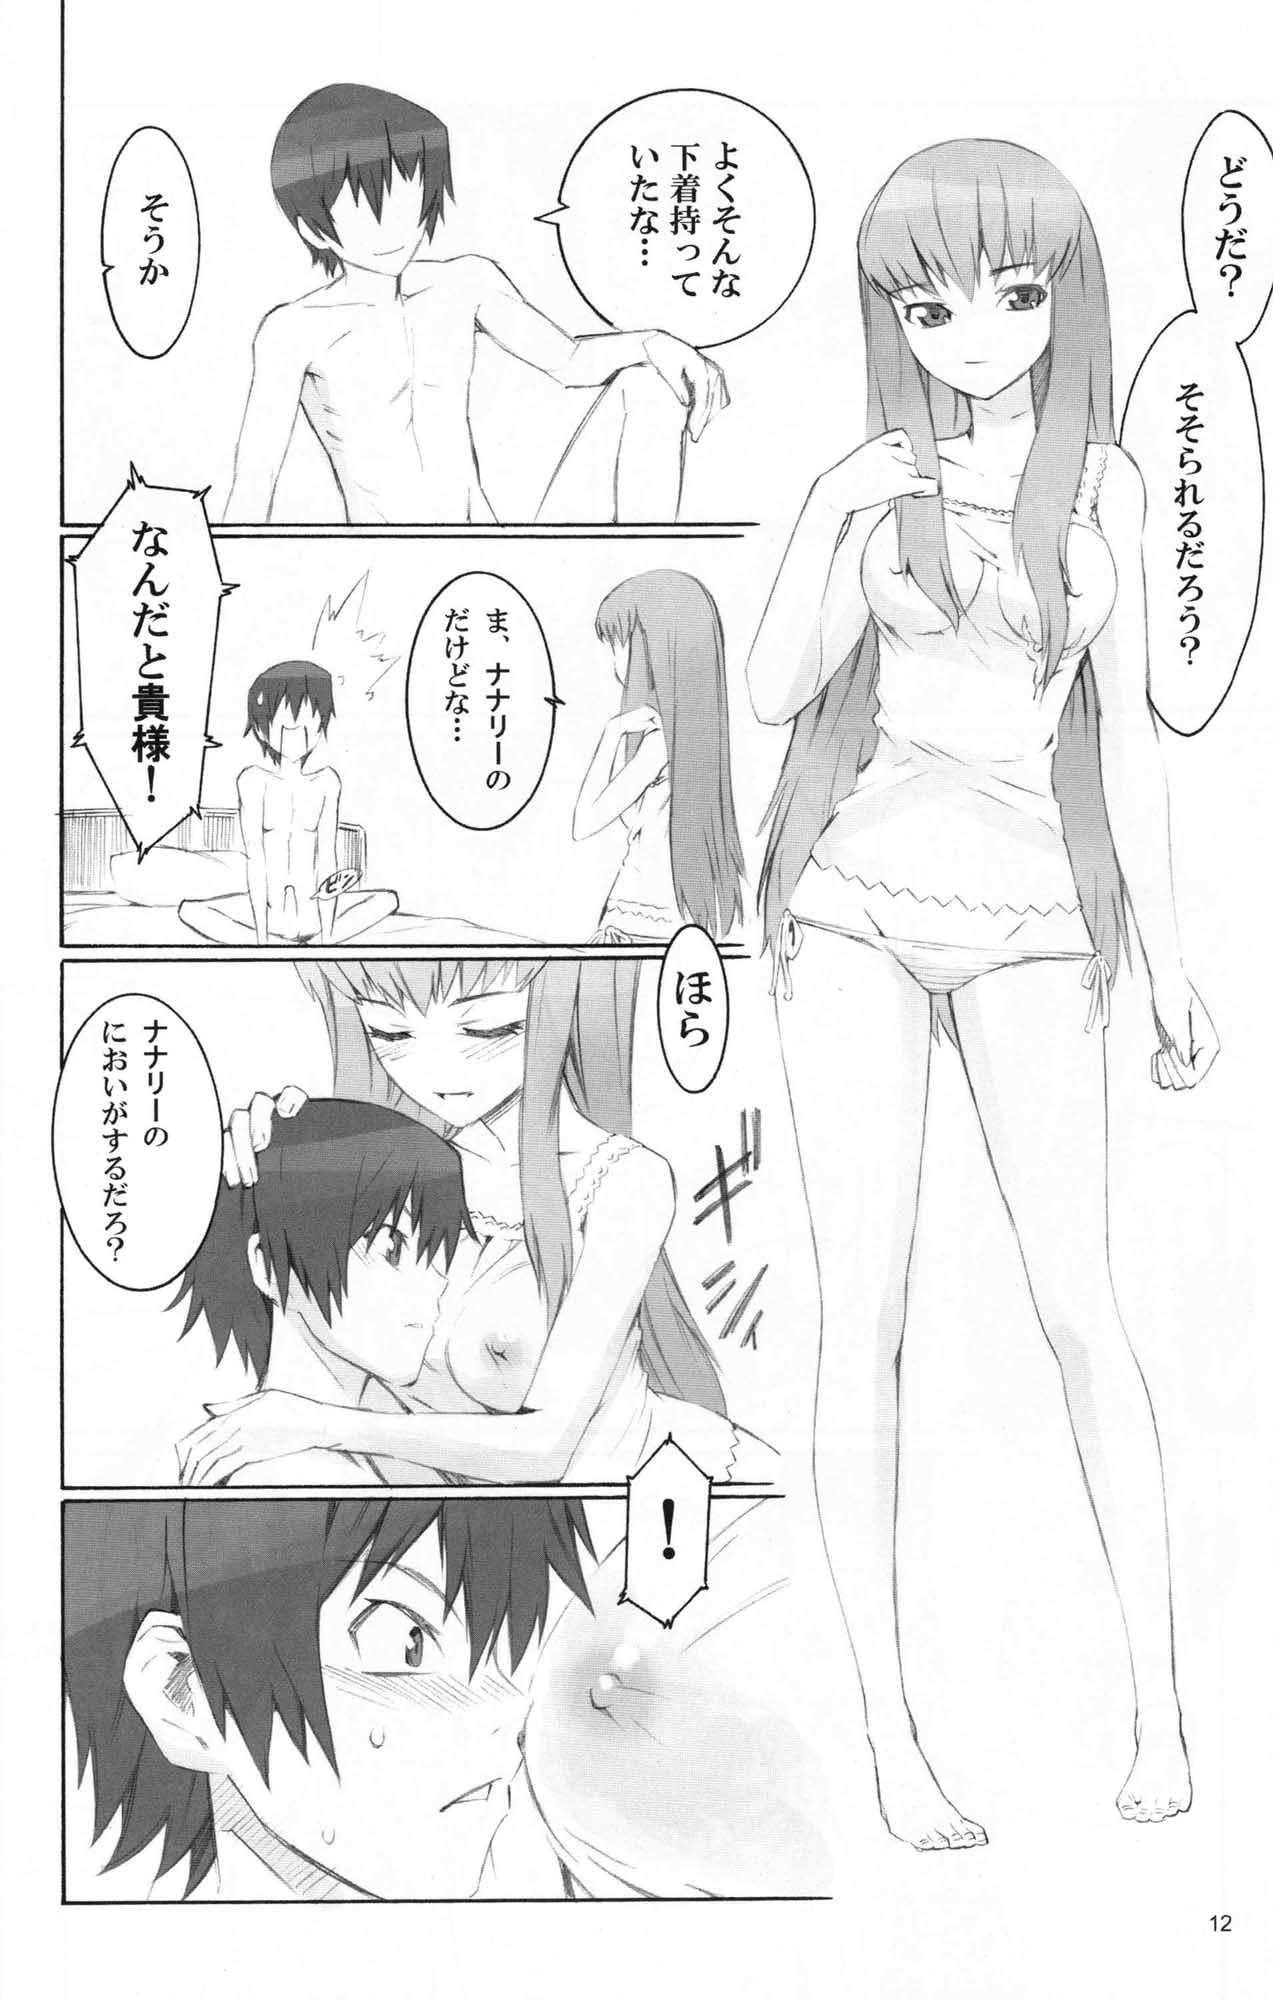 Tugging SOULFLY 4 - Code geass Safadinha - Page 11